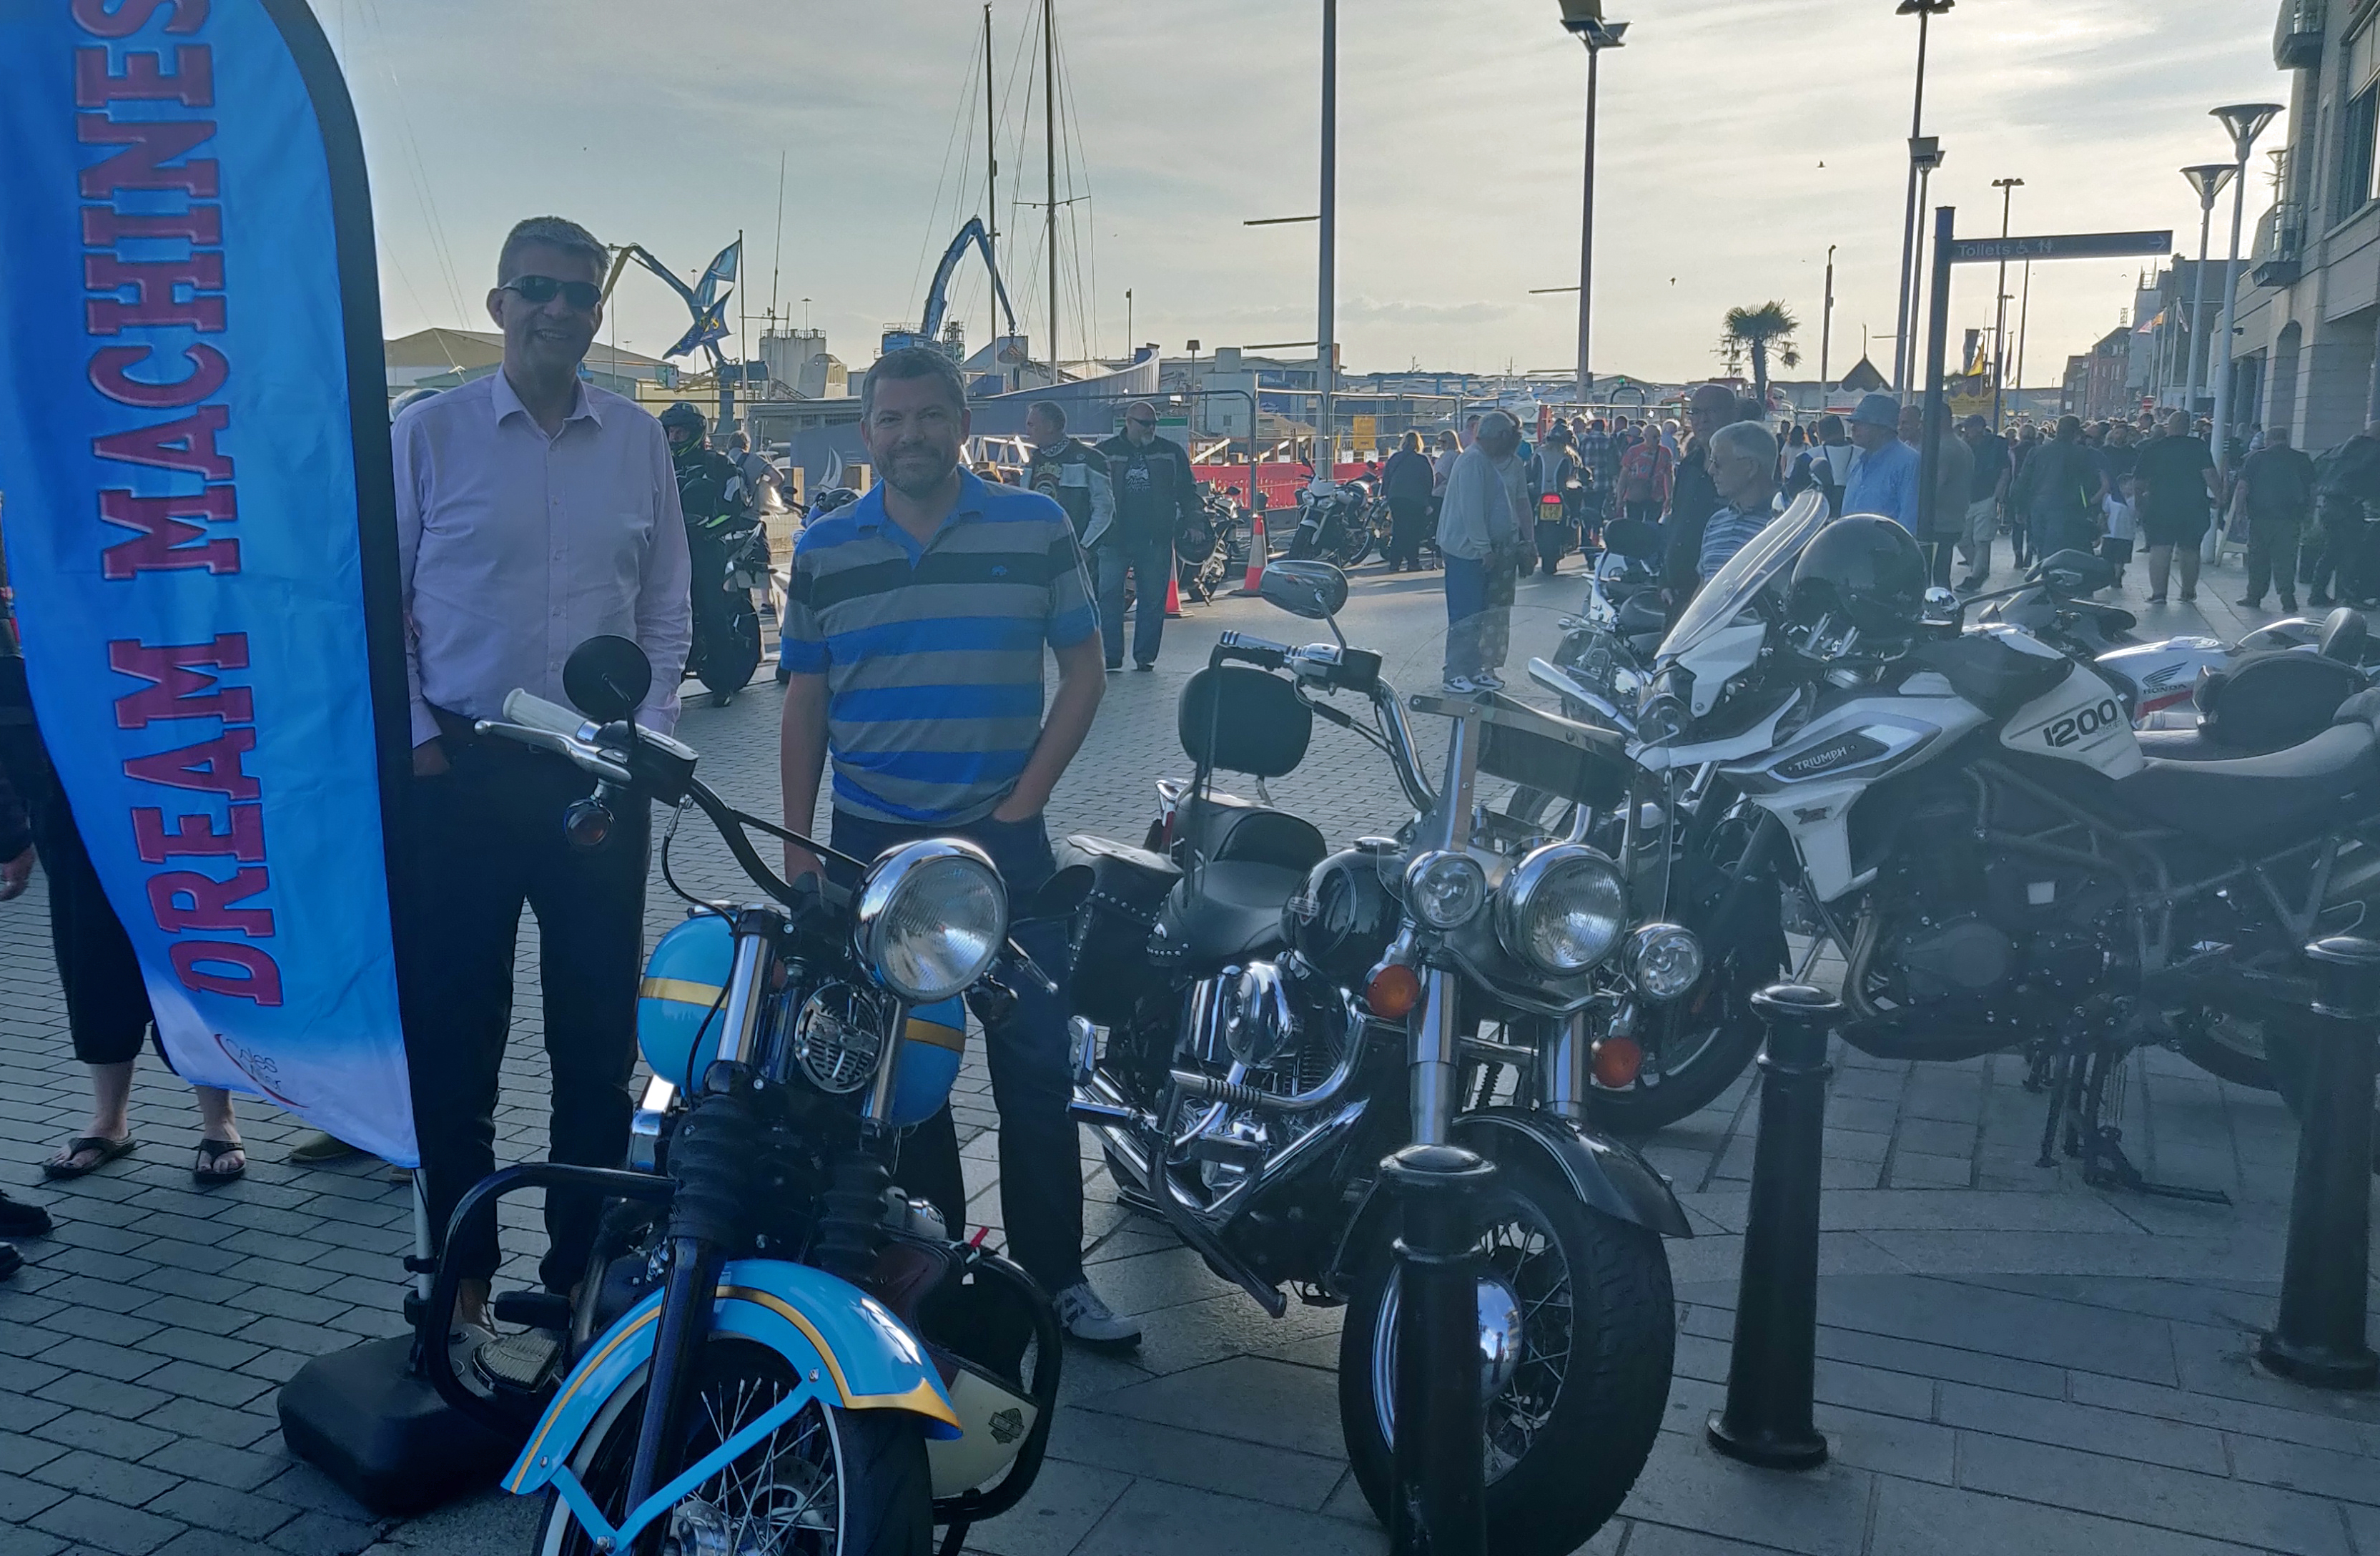 Bike of the Night winner pictured with motorbike on Poole Quay